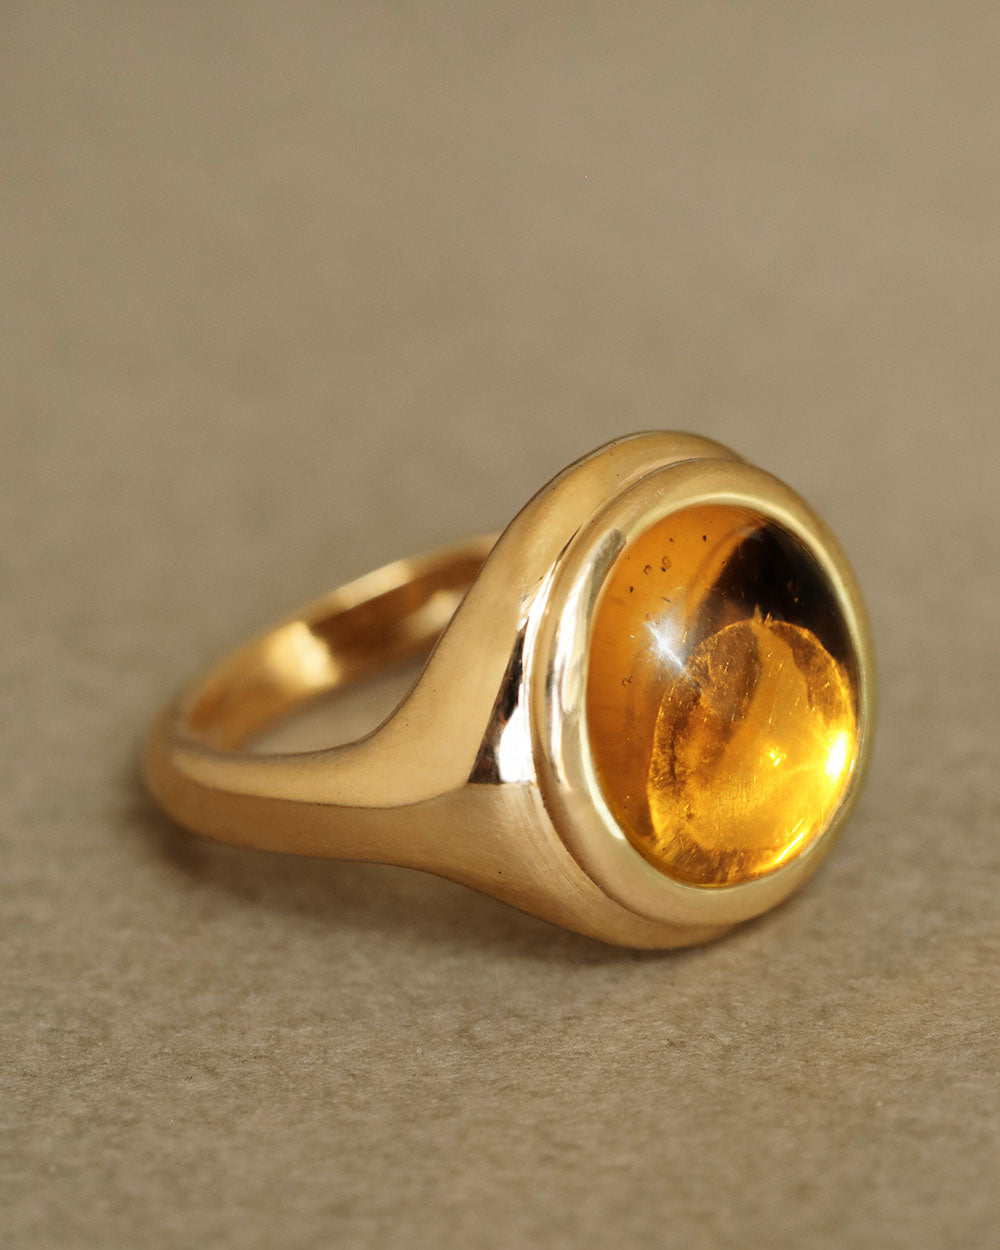 Golden large round cabochon citrine gem sits inside large round 18k solid yellow gold signet ring. The Monarch by George Rings.